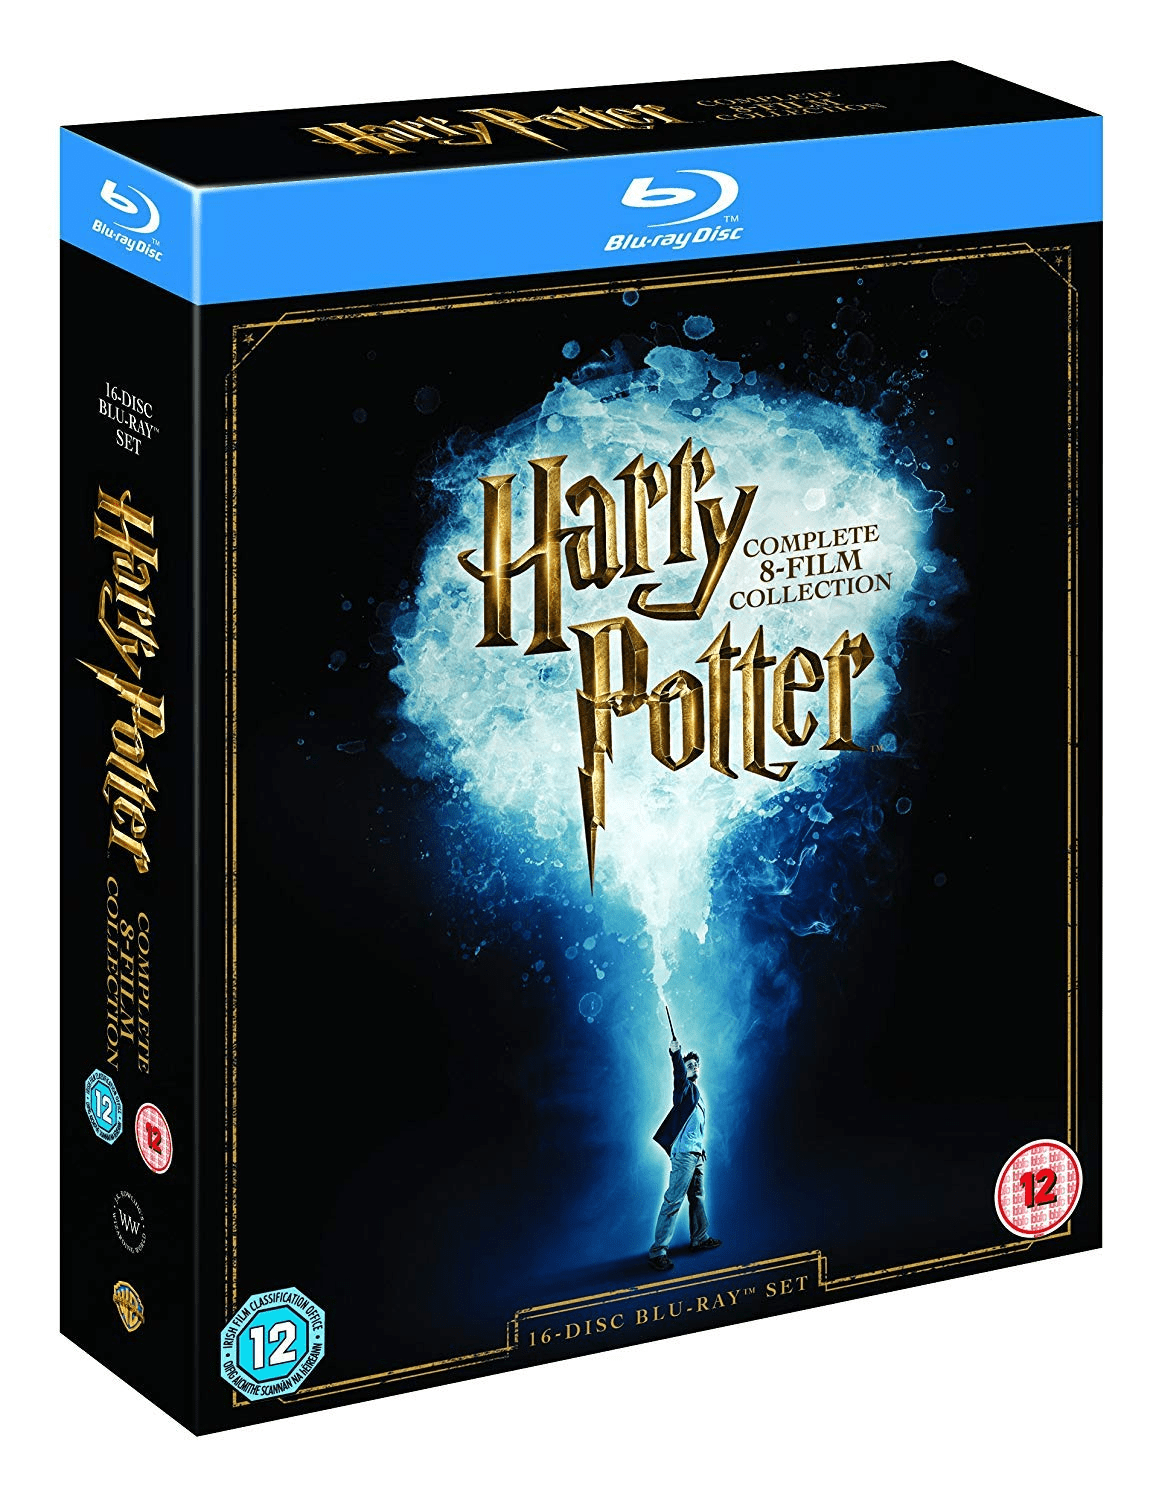 Harry Potter: The Complete Collection (International Region-Free) ( Blu-ray) - Walmart.com